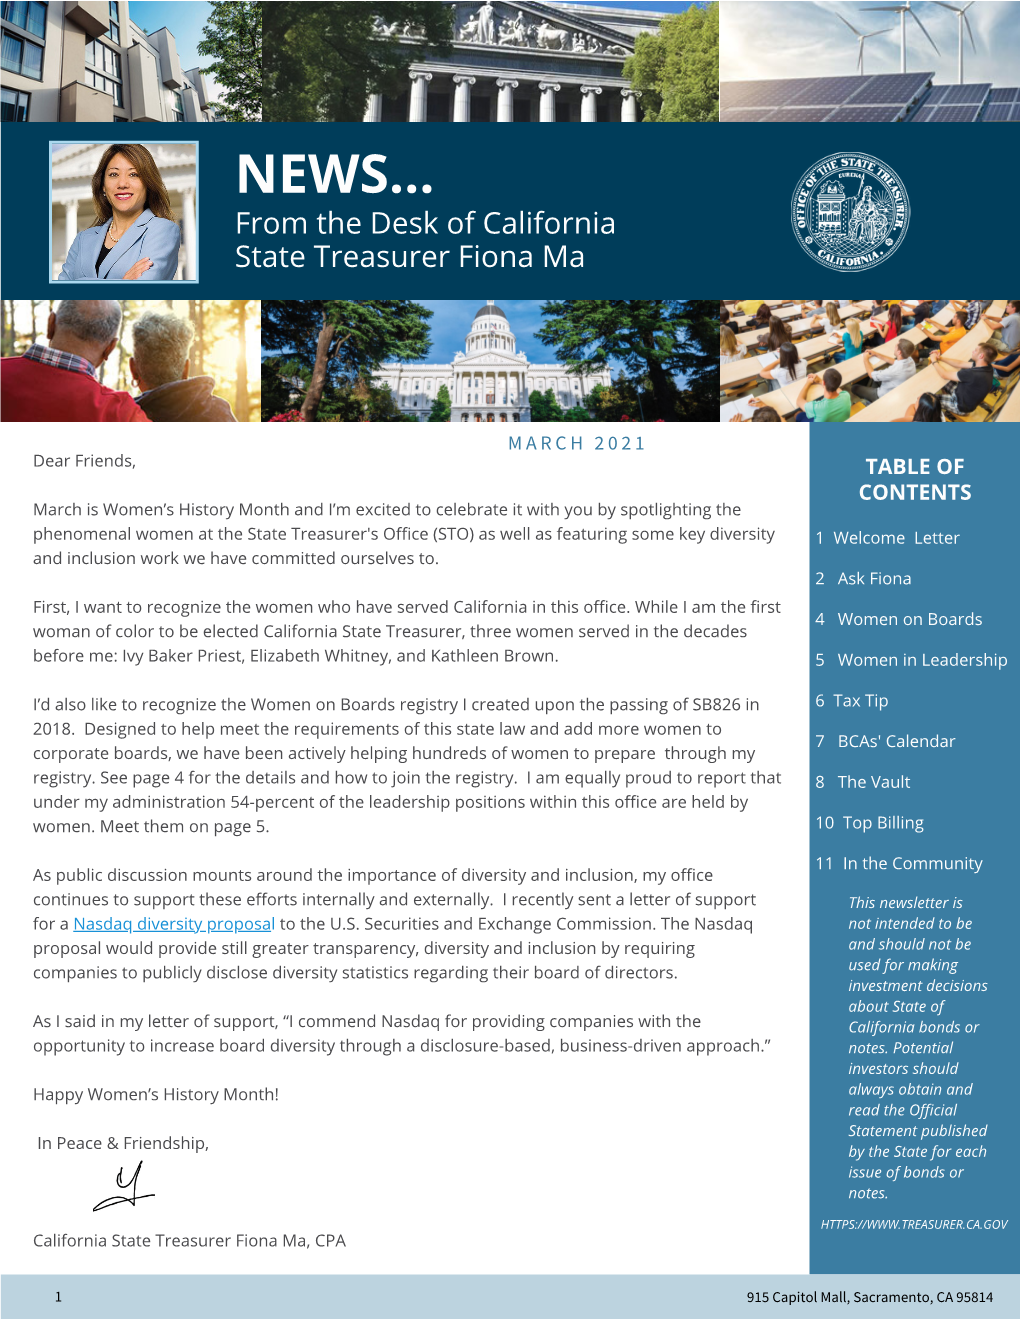 NEWS... from the Desk of California State Treasurer Fiona Ma